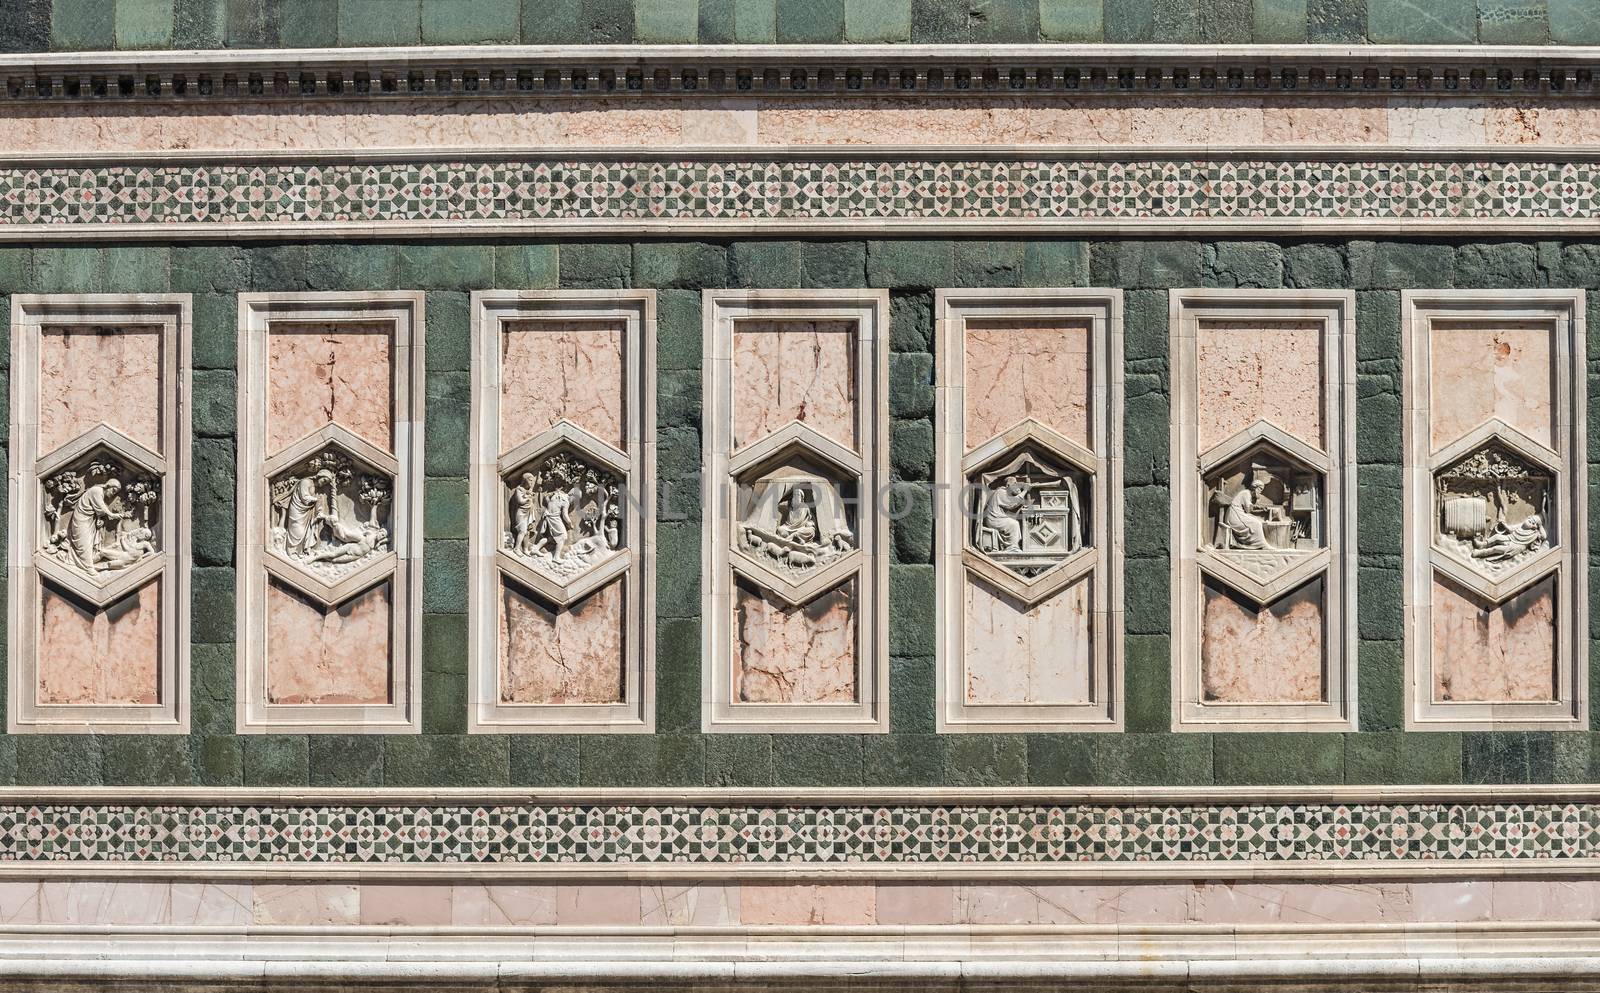 In the picture detail of the Basilica of Santa Maria del Fiore in Florence, a patterns of rectangular statues symmetrical.